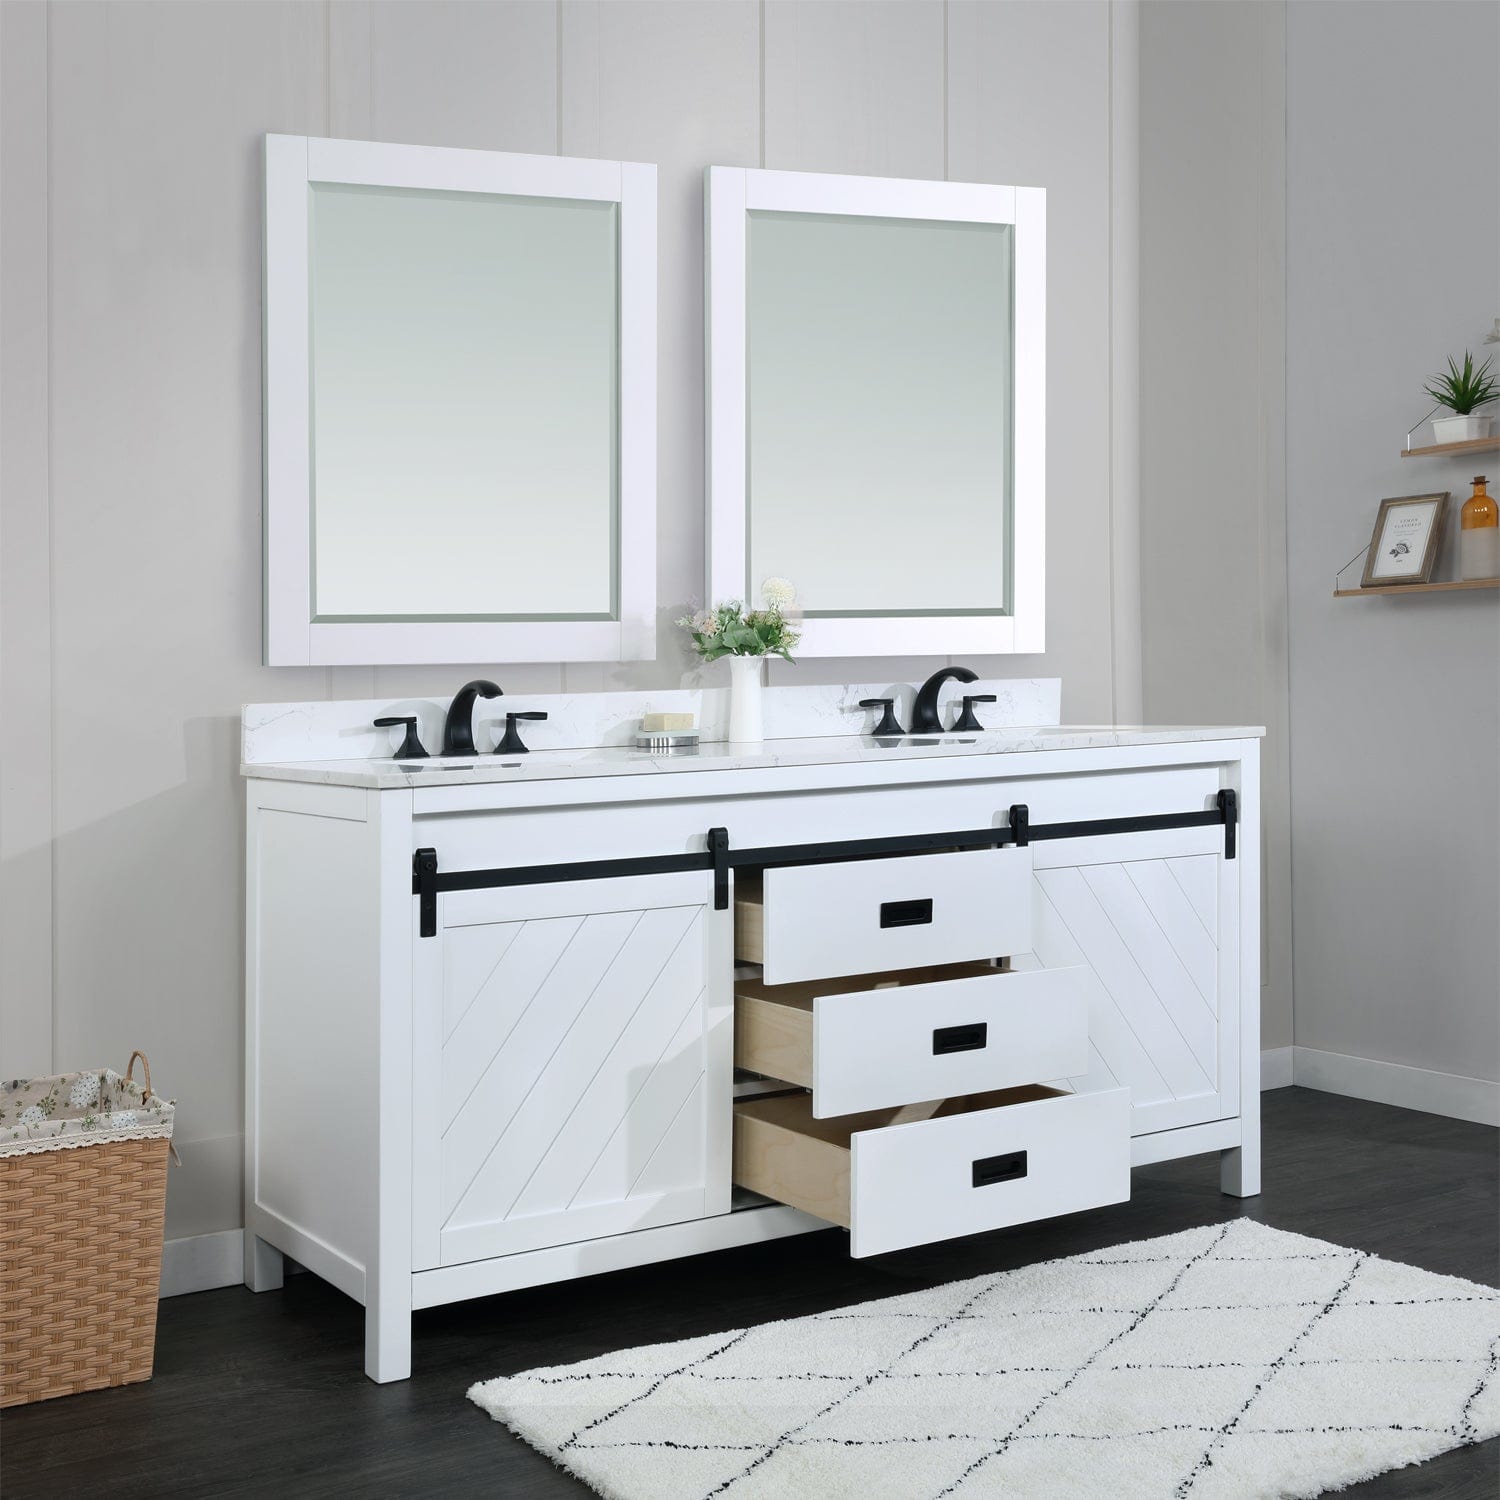 Altair Kinsley 72" Double Bathroom Vanity Set in White and Carrara White Marble Countertop with Mirror 536072-WH-AW - Molaix696952511291Vanity536072-WH-AW